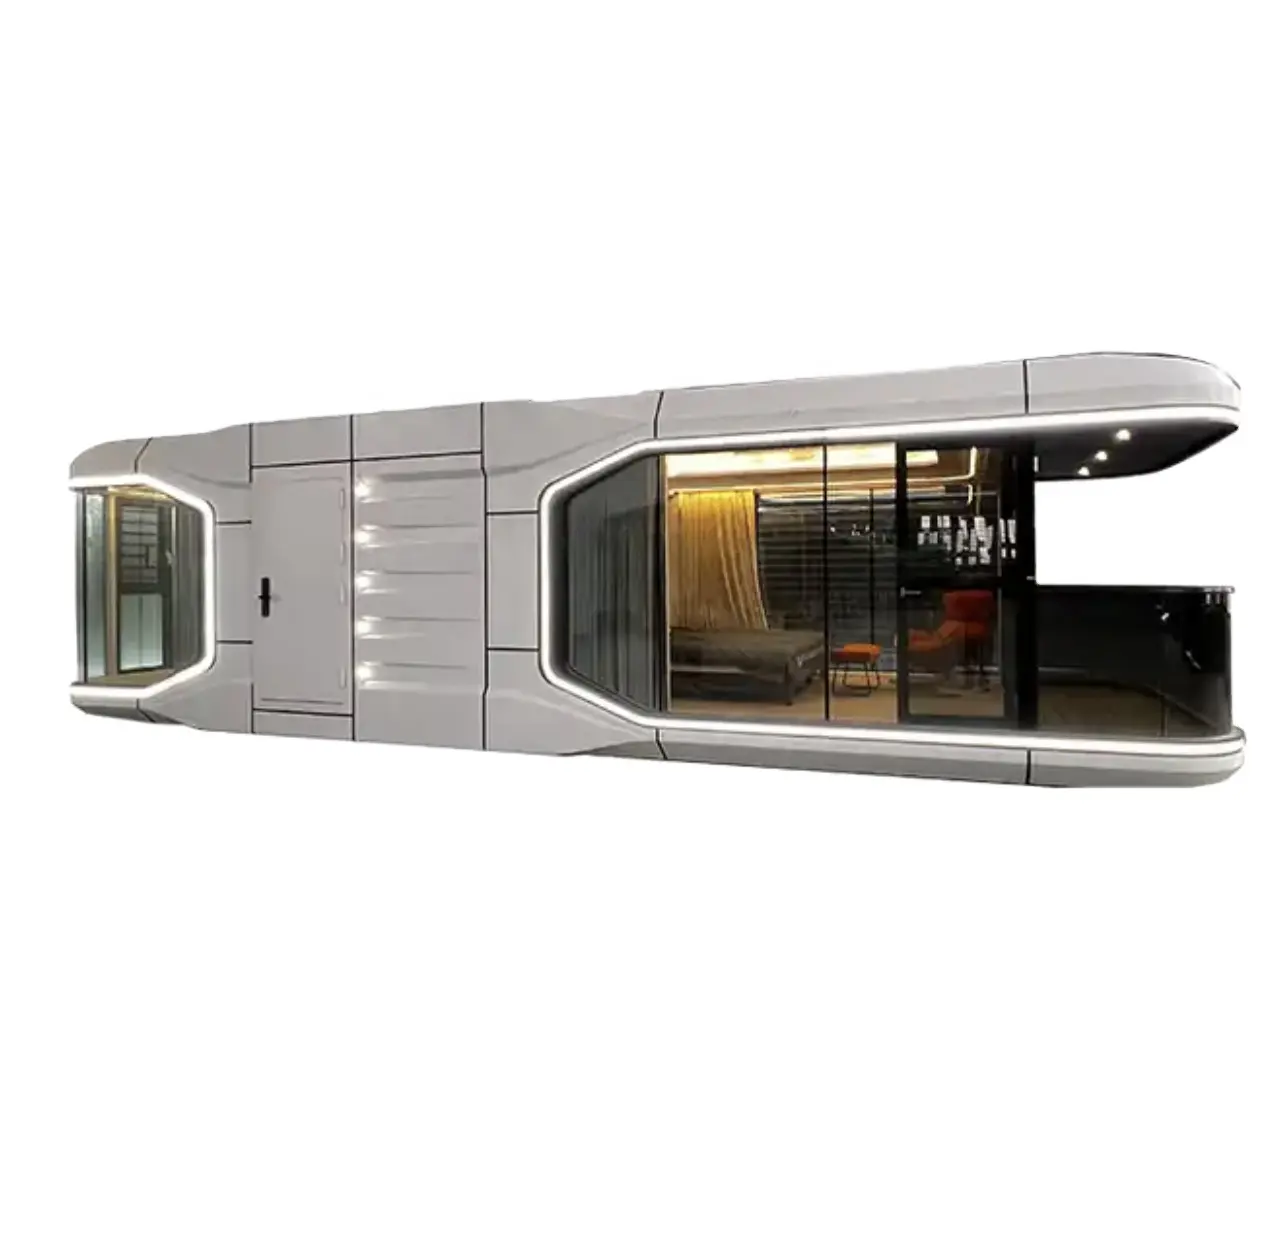 c70 oem modular prefab airship prefabricated mobile tiny Hangfa space capsule homestay container house e7